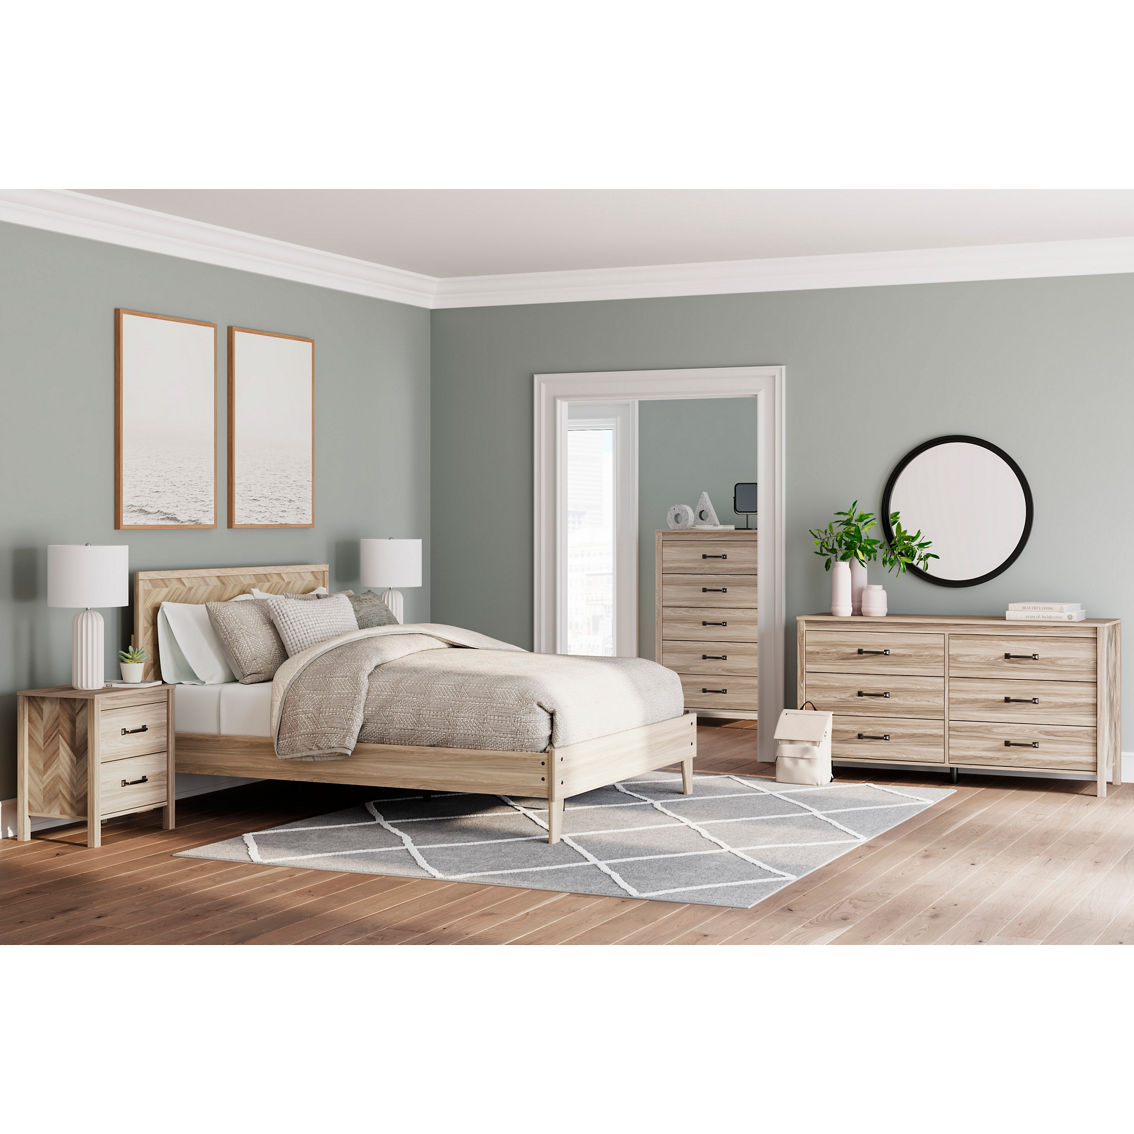 Signature Design by Ashley Battelle Ready-to-Assemble Panel Bed - Image 2 of 7